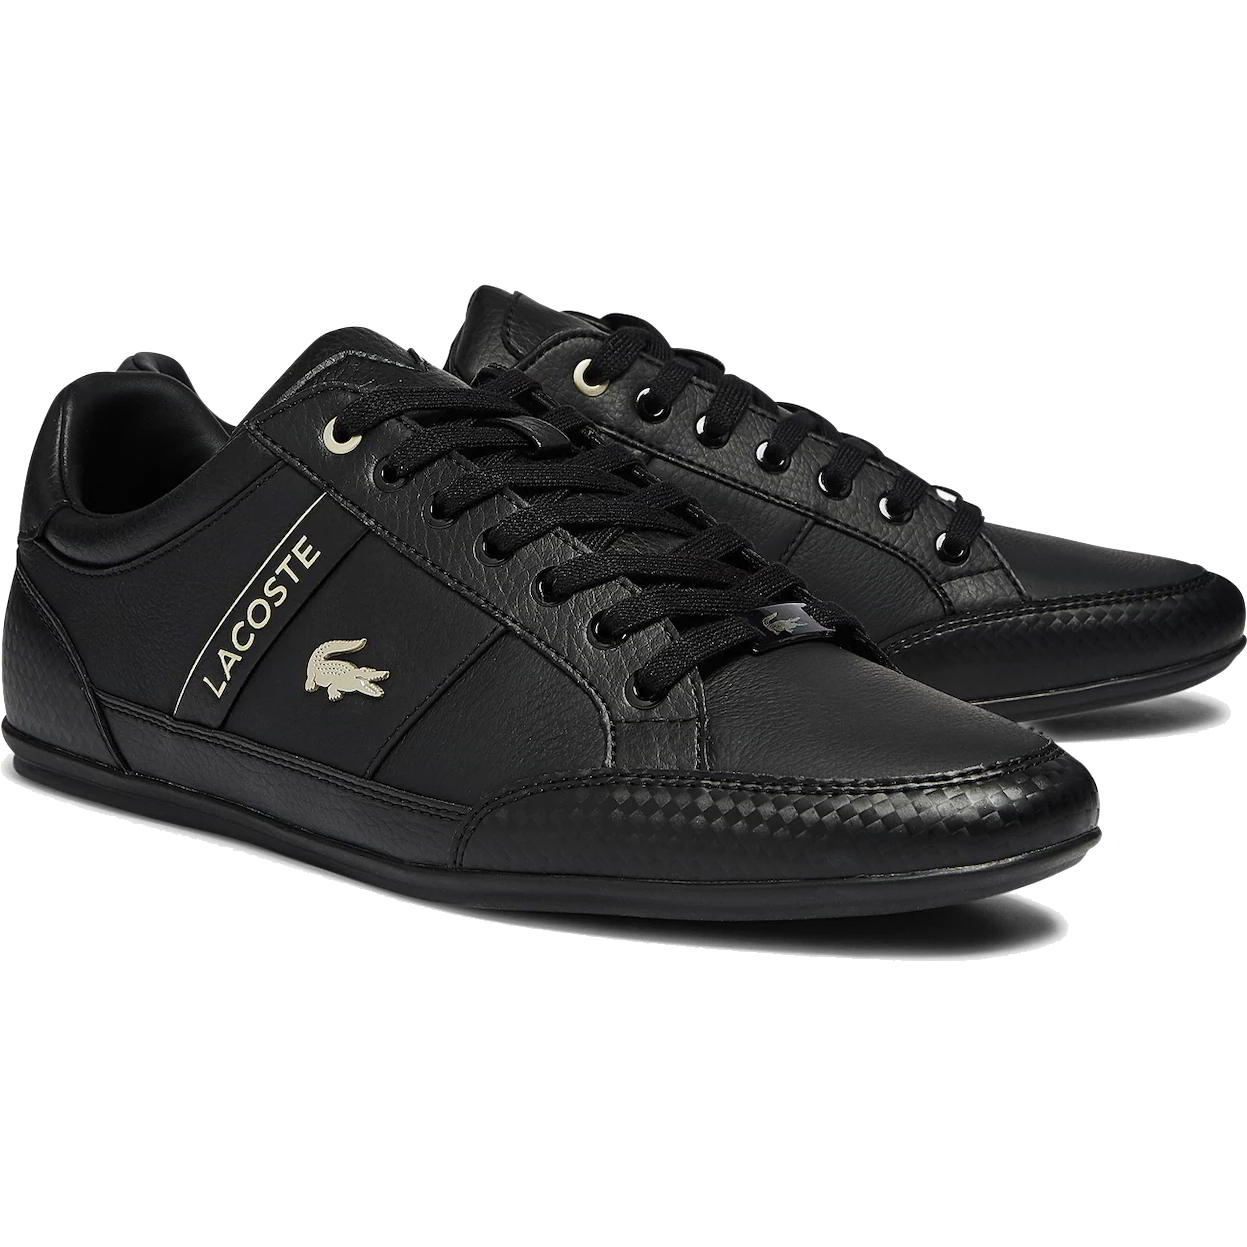 Lacoste Mens Chaymon 721 Tainers Shoes - UK 12 Black 2951